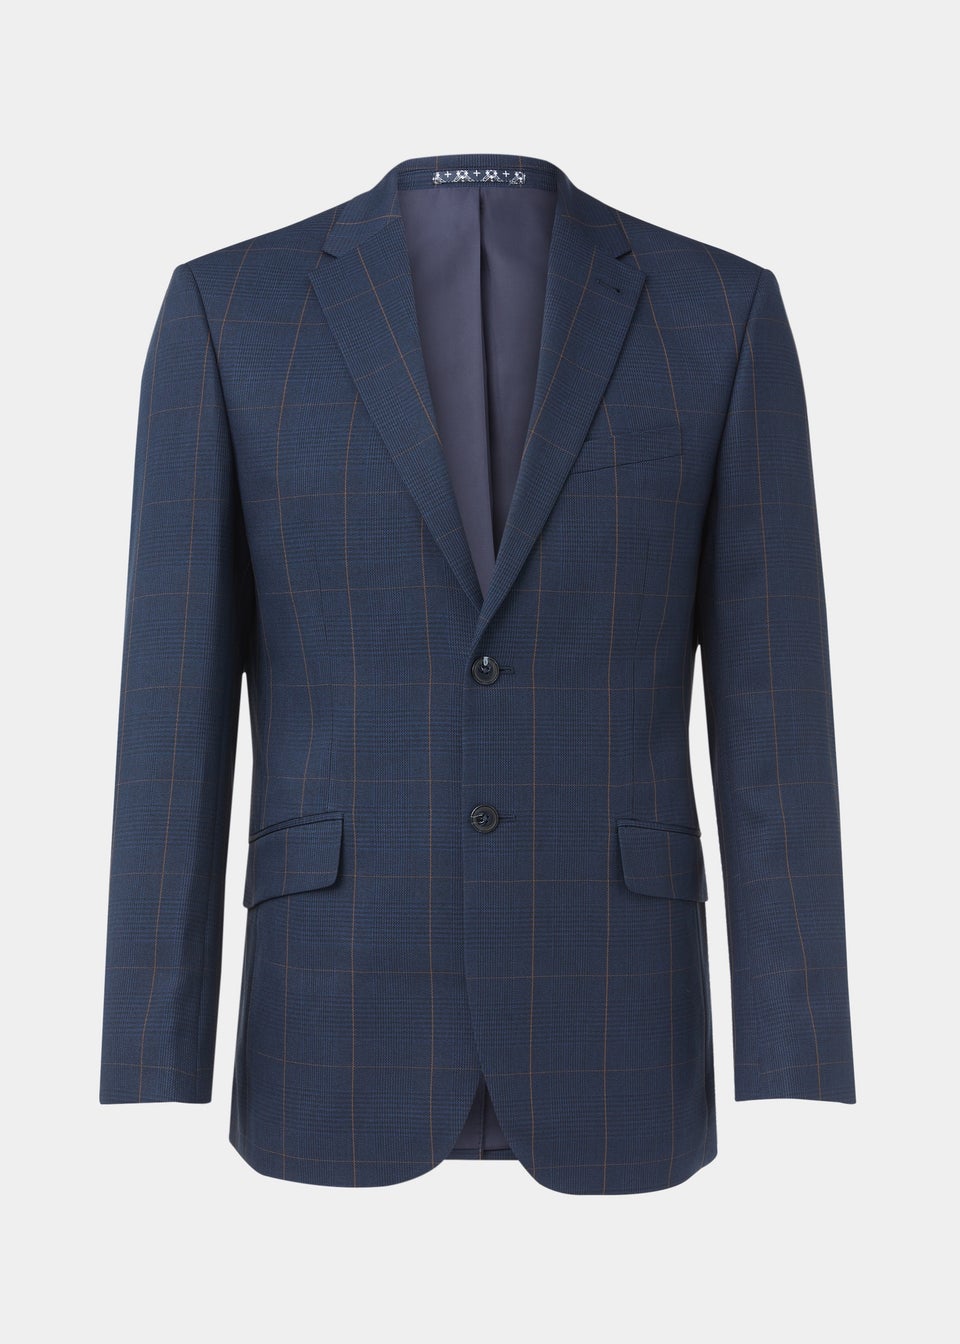 Taylor & Wright Westminster Navy Tailored Fit Suit Jacket